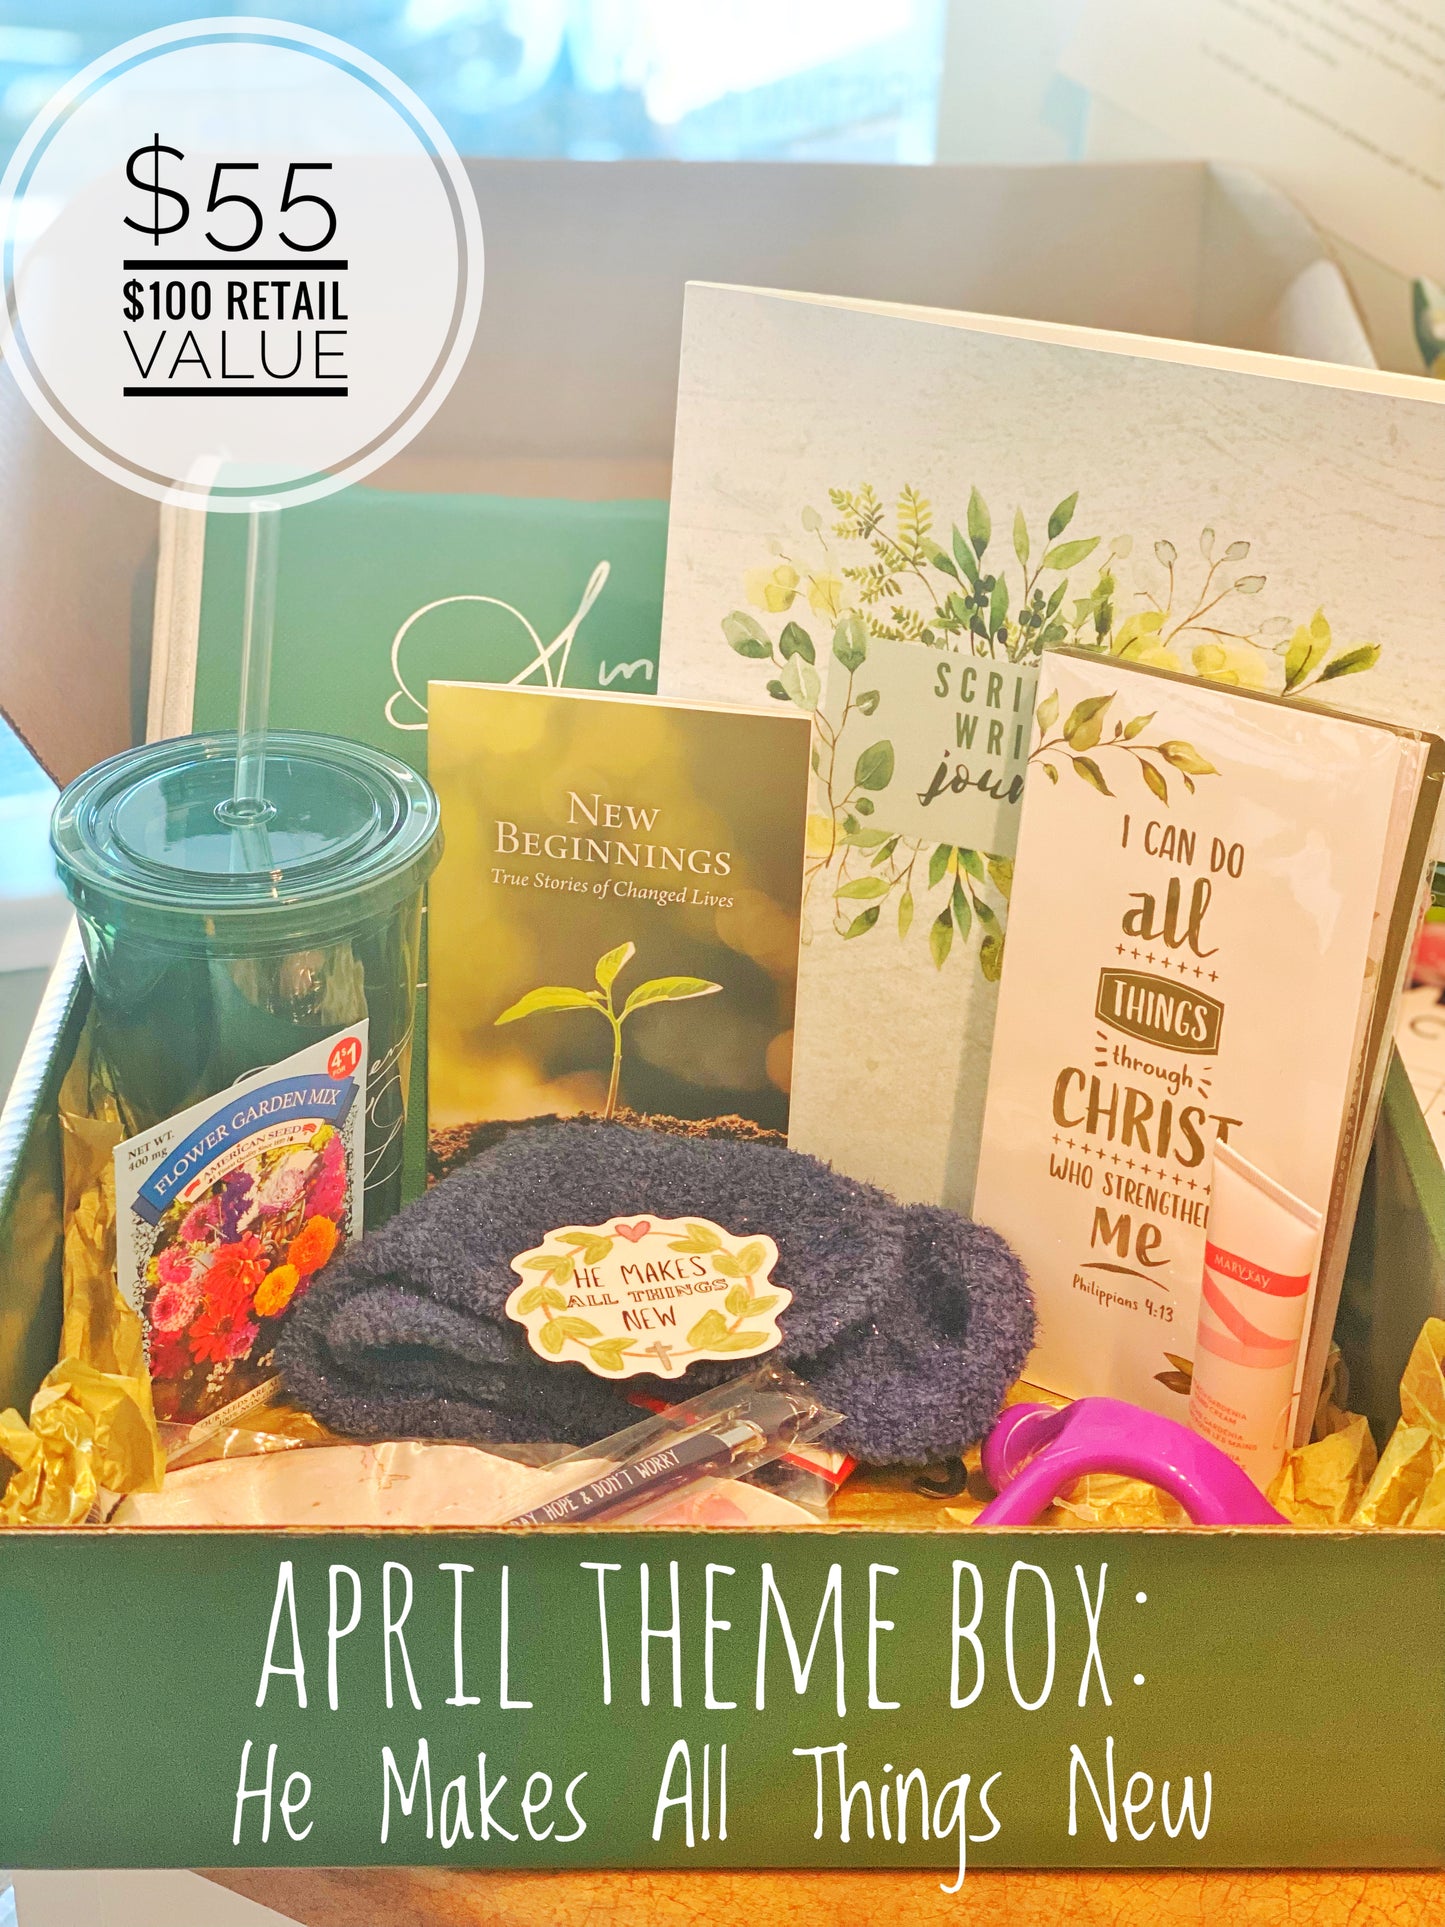 April Theme Box: He Makes All Things New